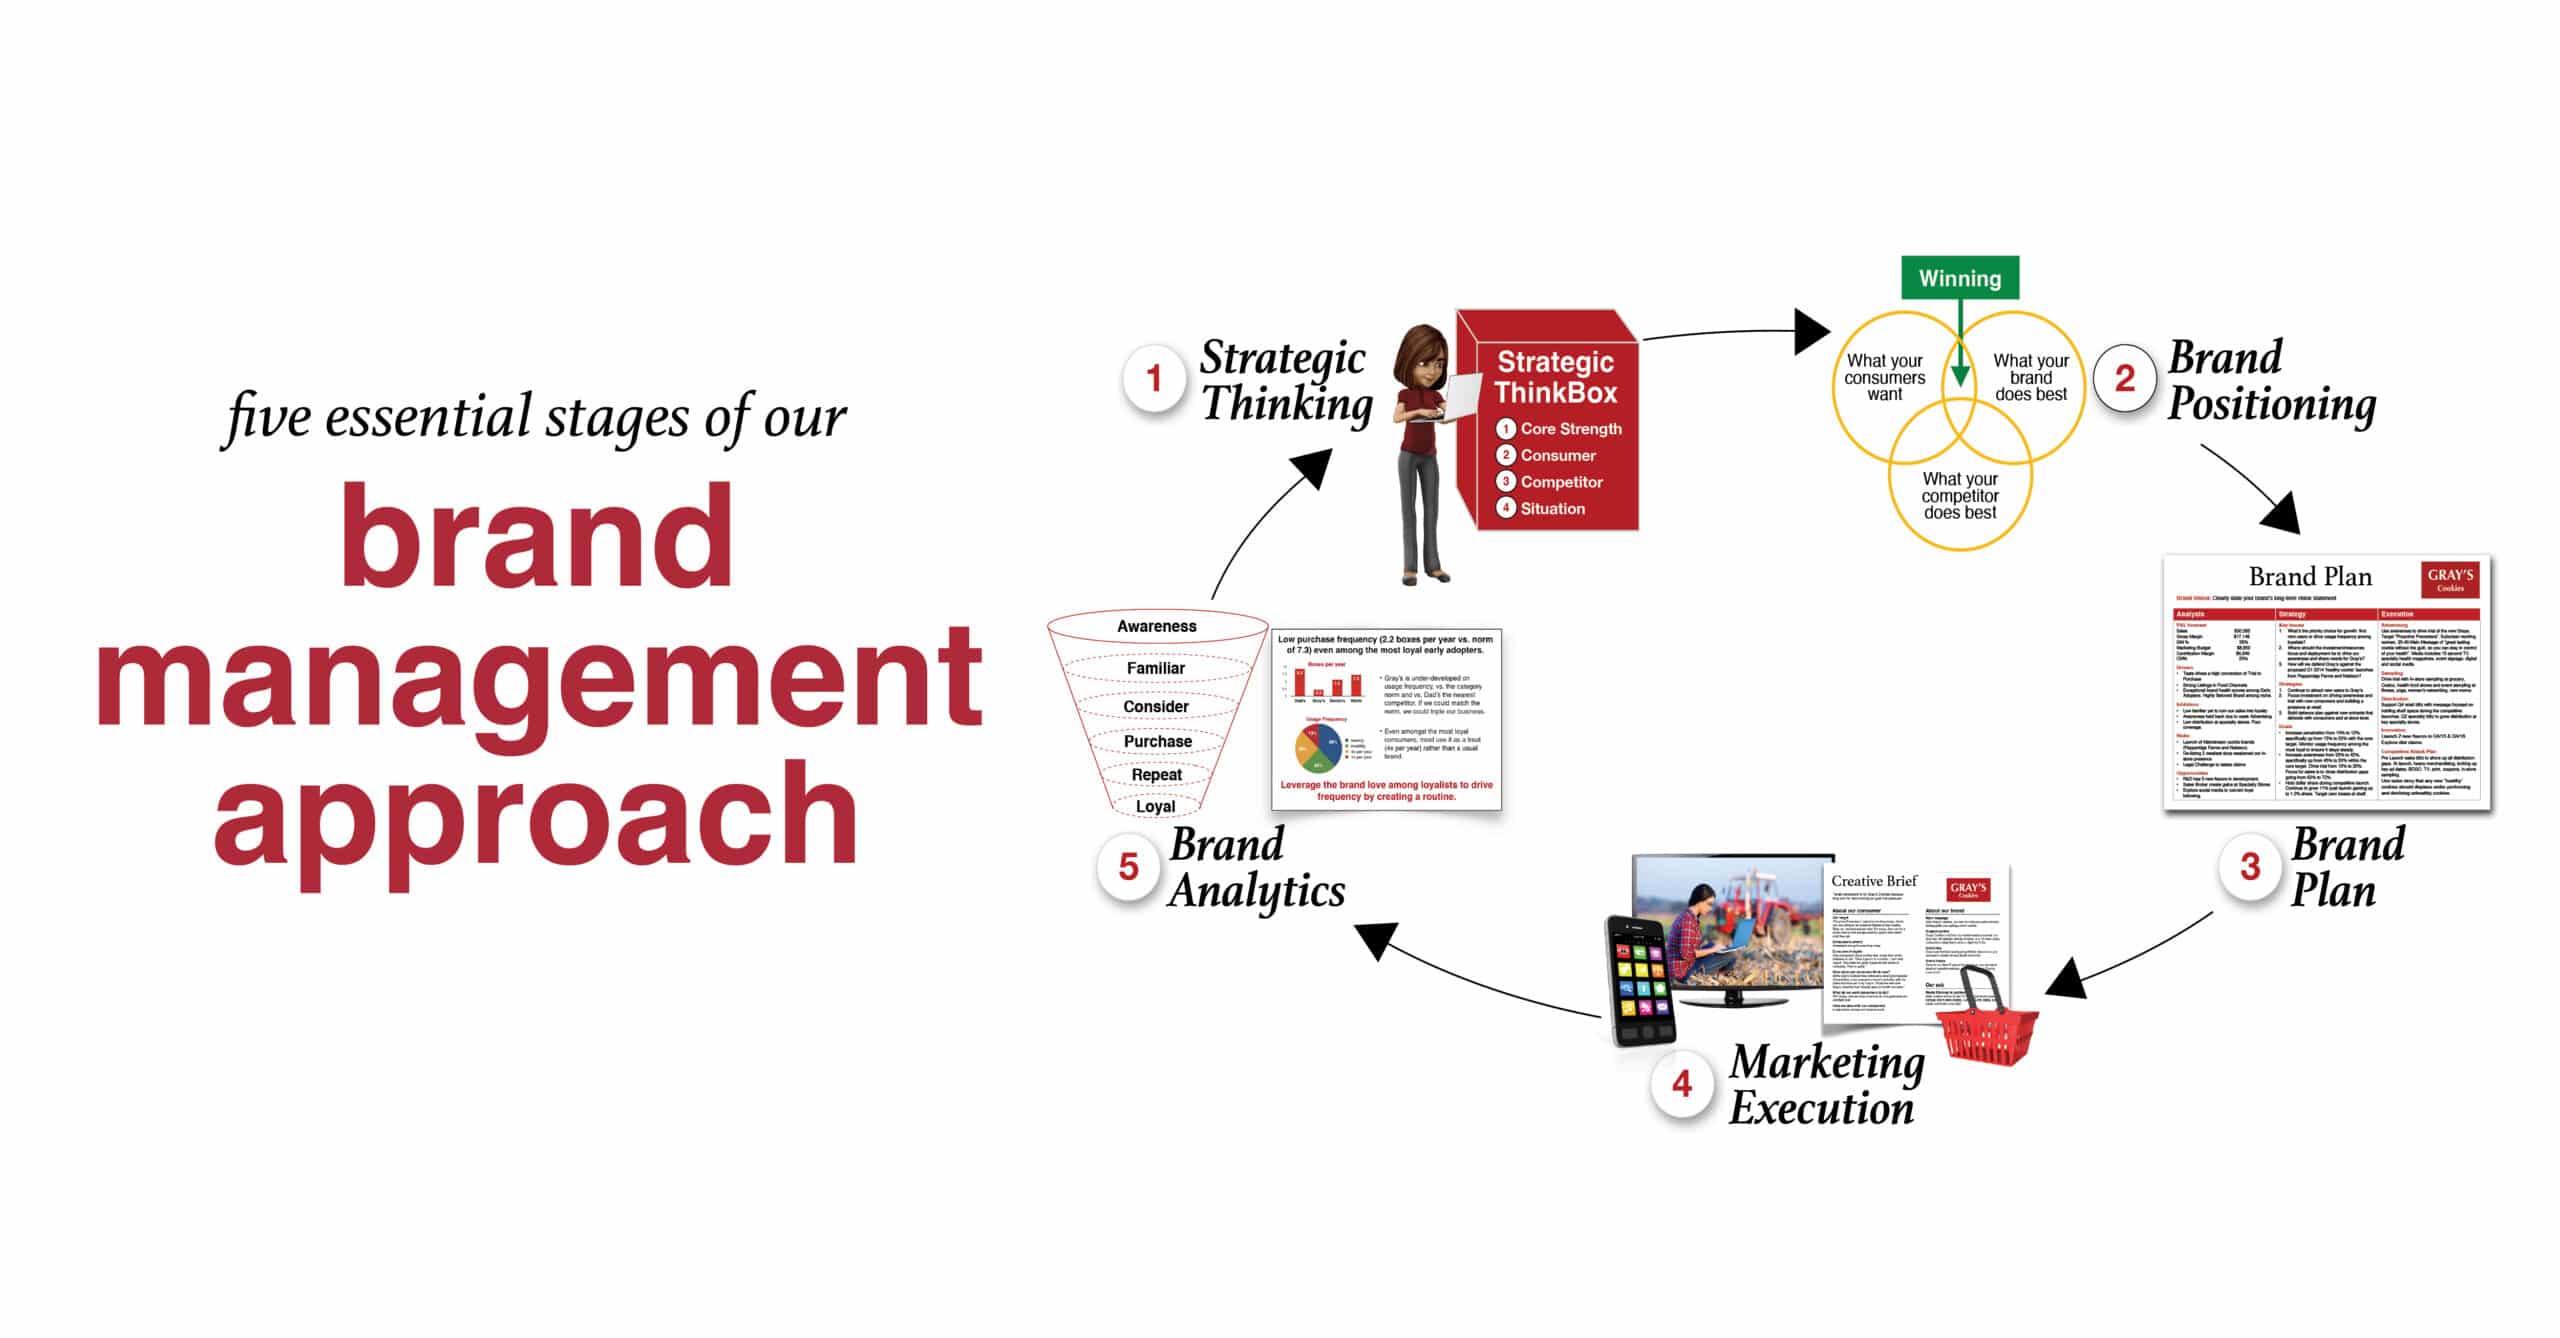 brand management process for your team